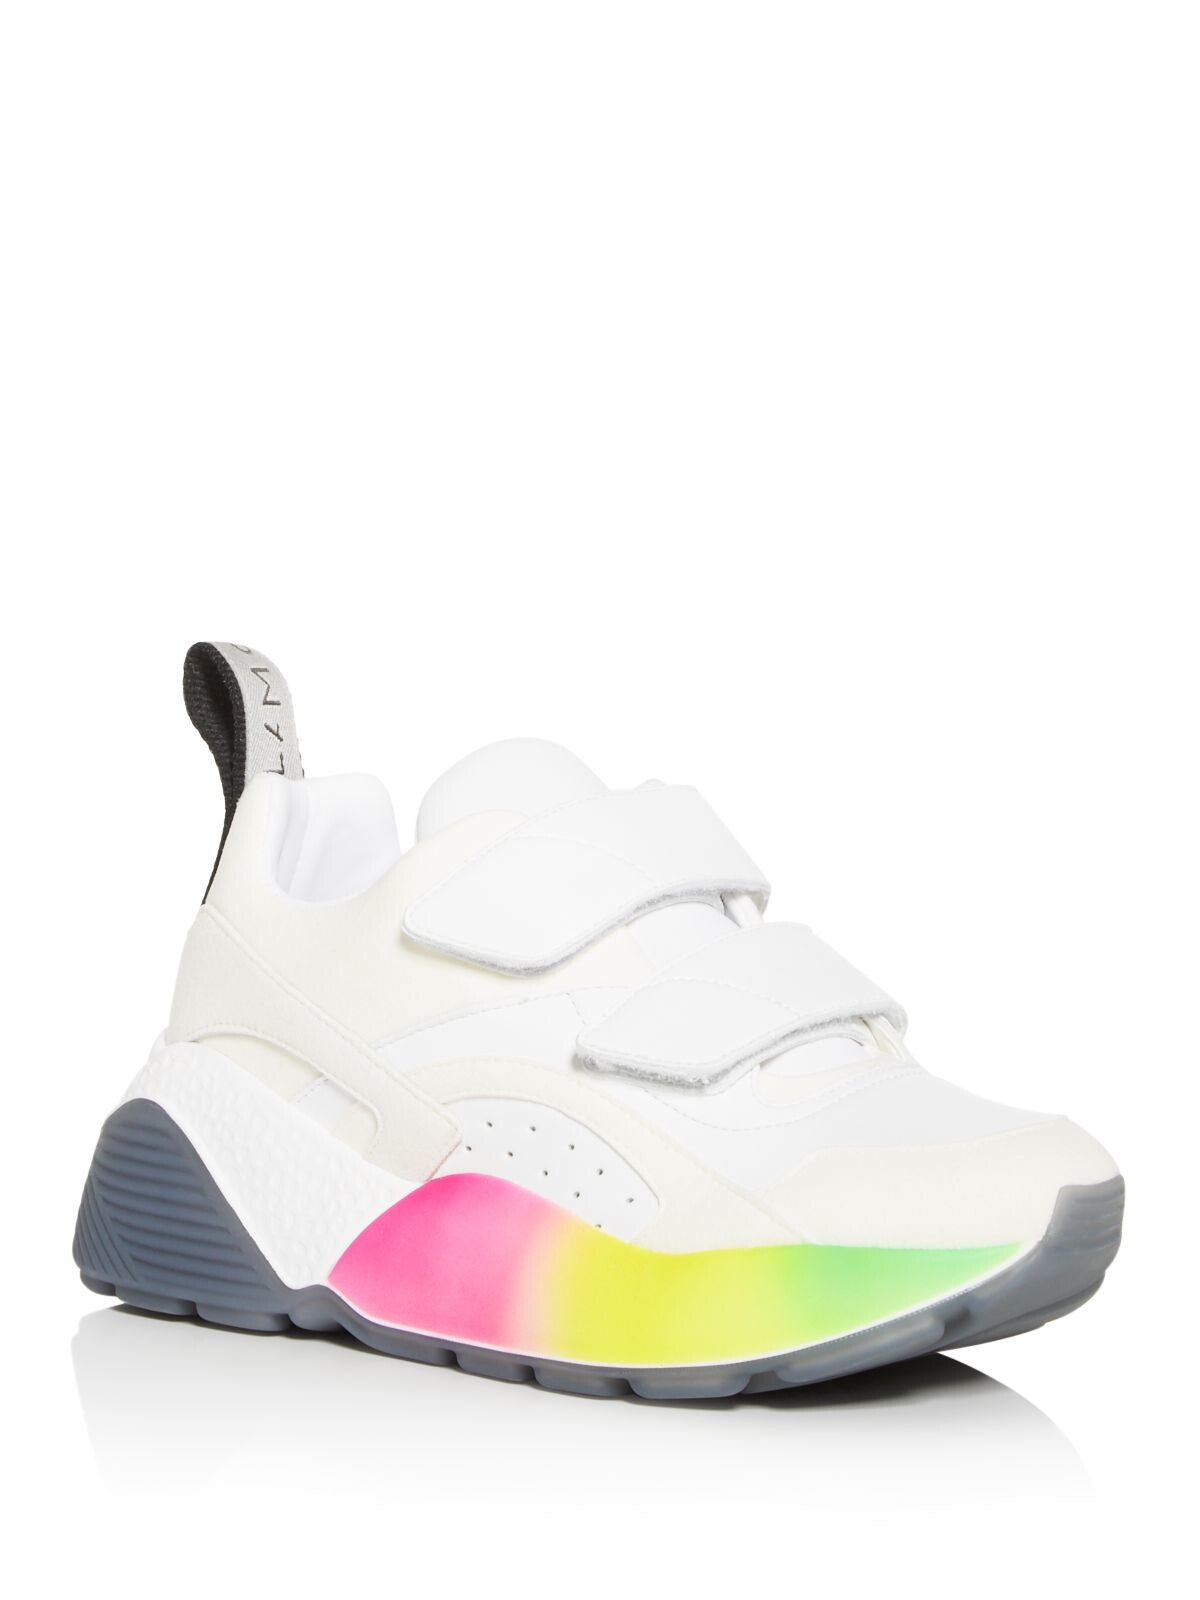 STELLAMCCARTNEY Womens White Rainbow Ombre Accent Logo Pull Strap Cushioned Eclypse Round Toe Platform Athletic Sneakers Shoes 40